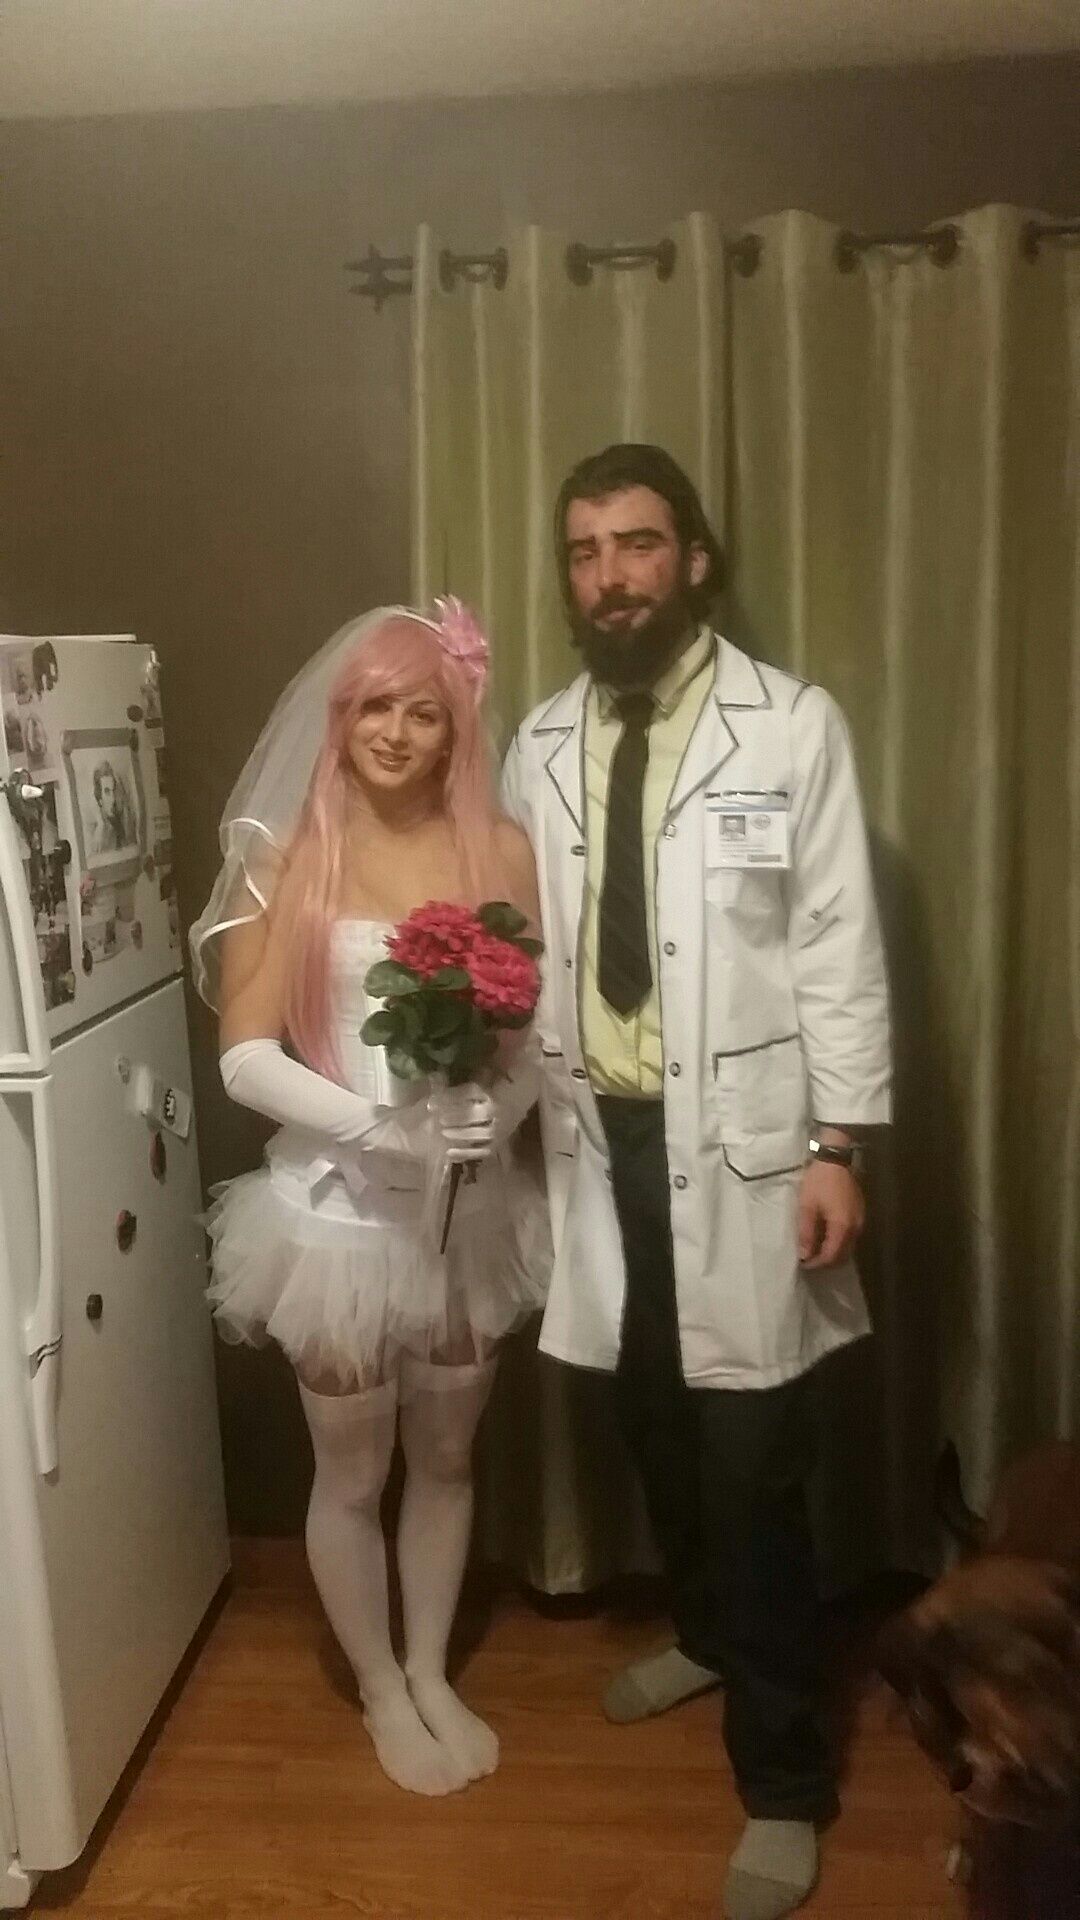 Fans of Archer? Gf and I as Krieger and Mitsuko